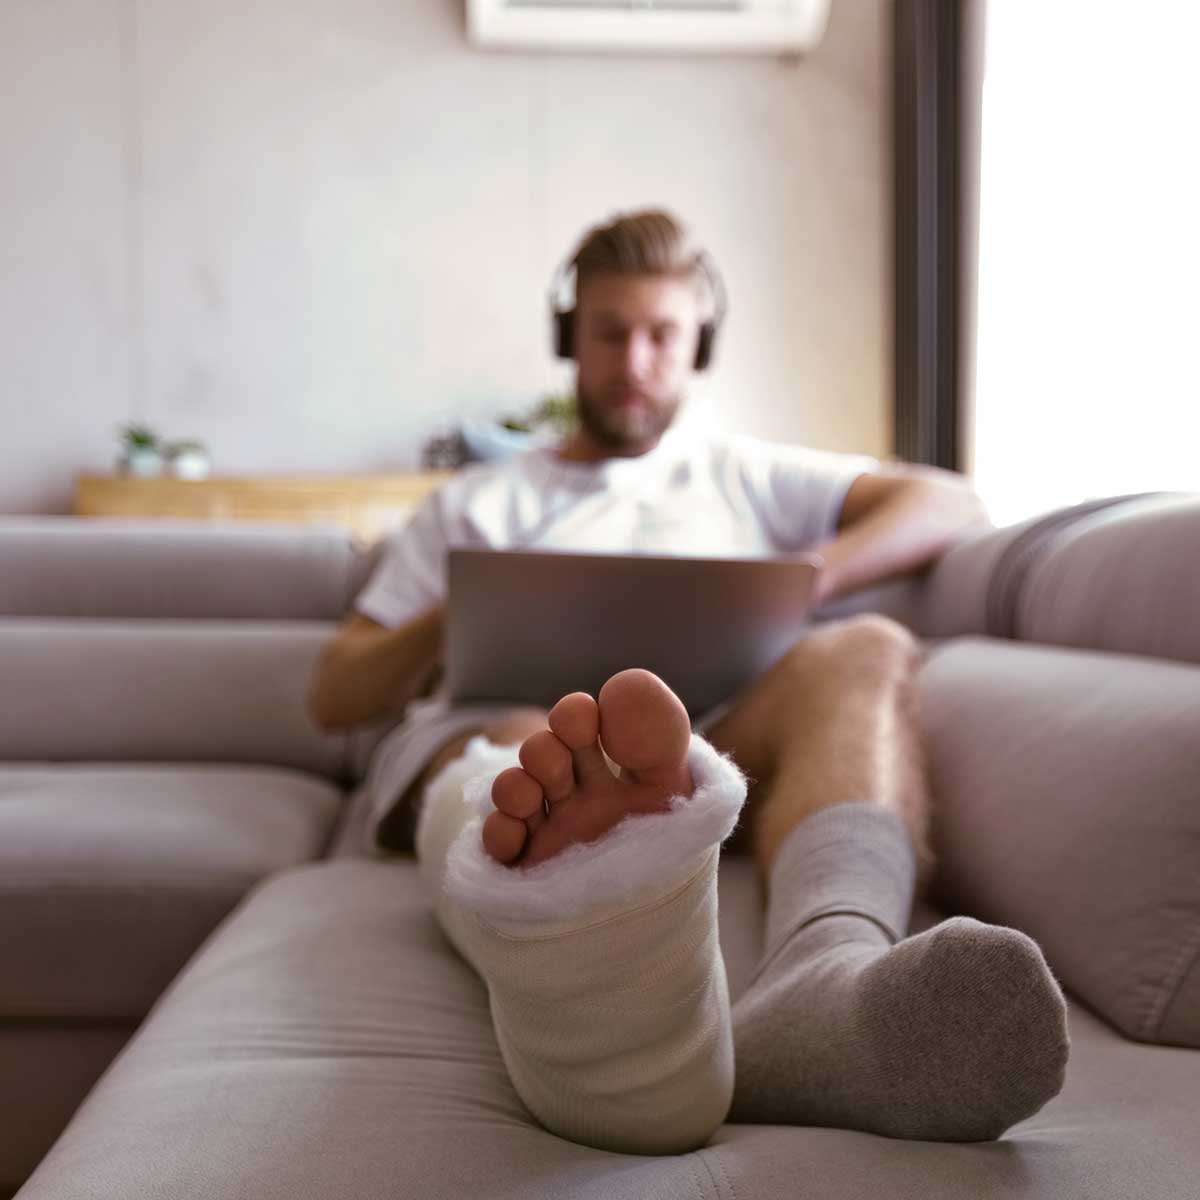 Sick leave insurance for the self-employed